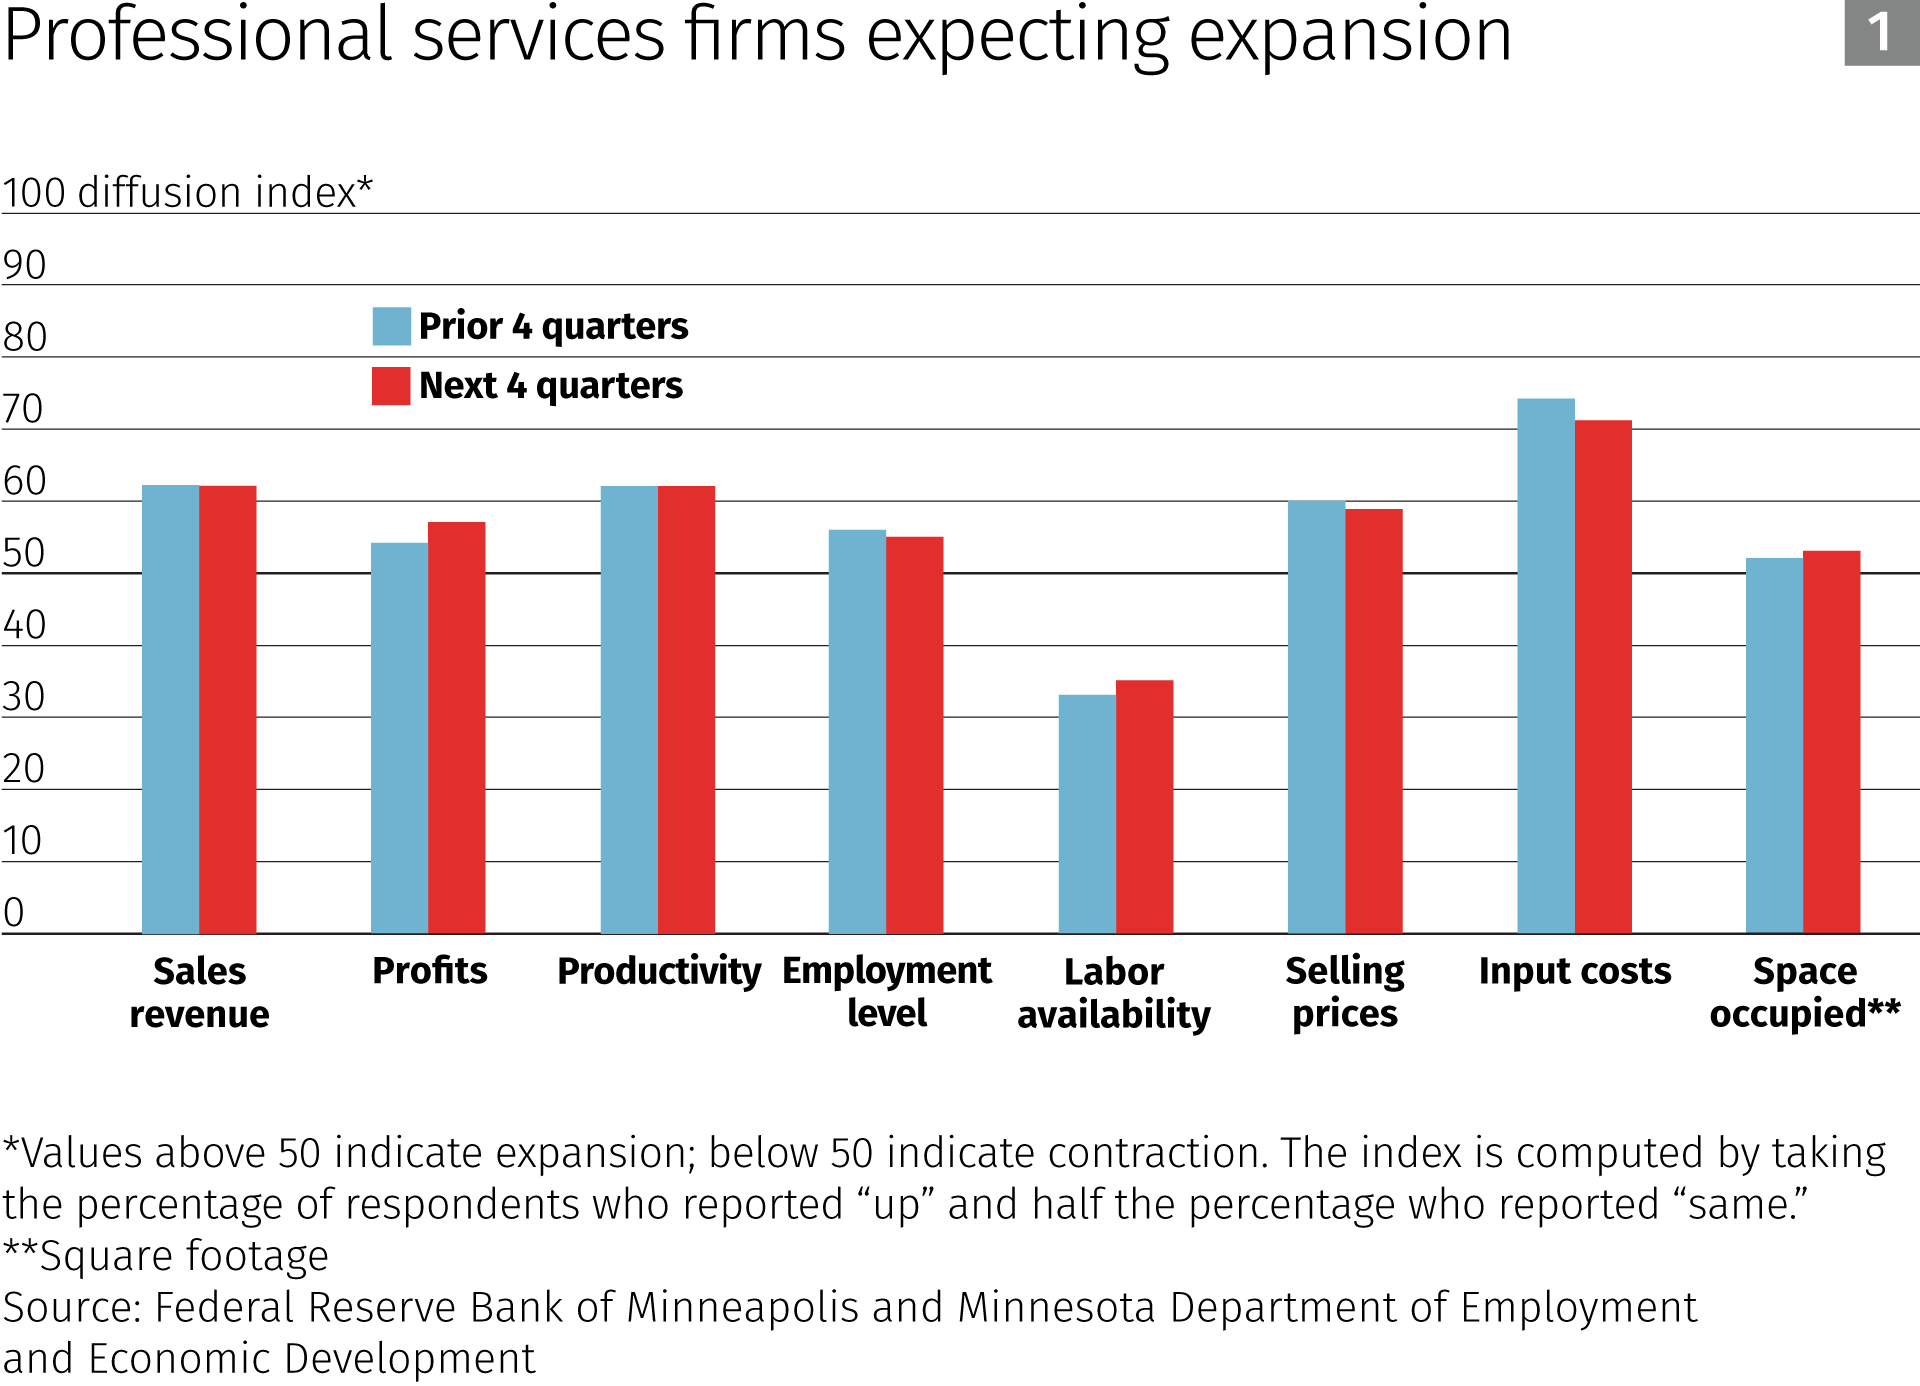 Professional services firms expecting expansion